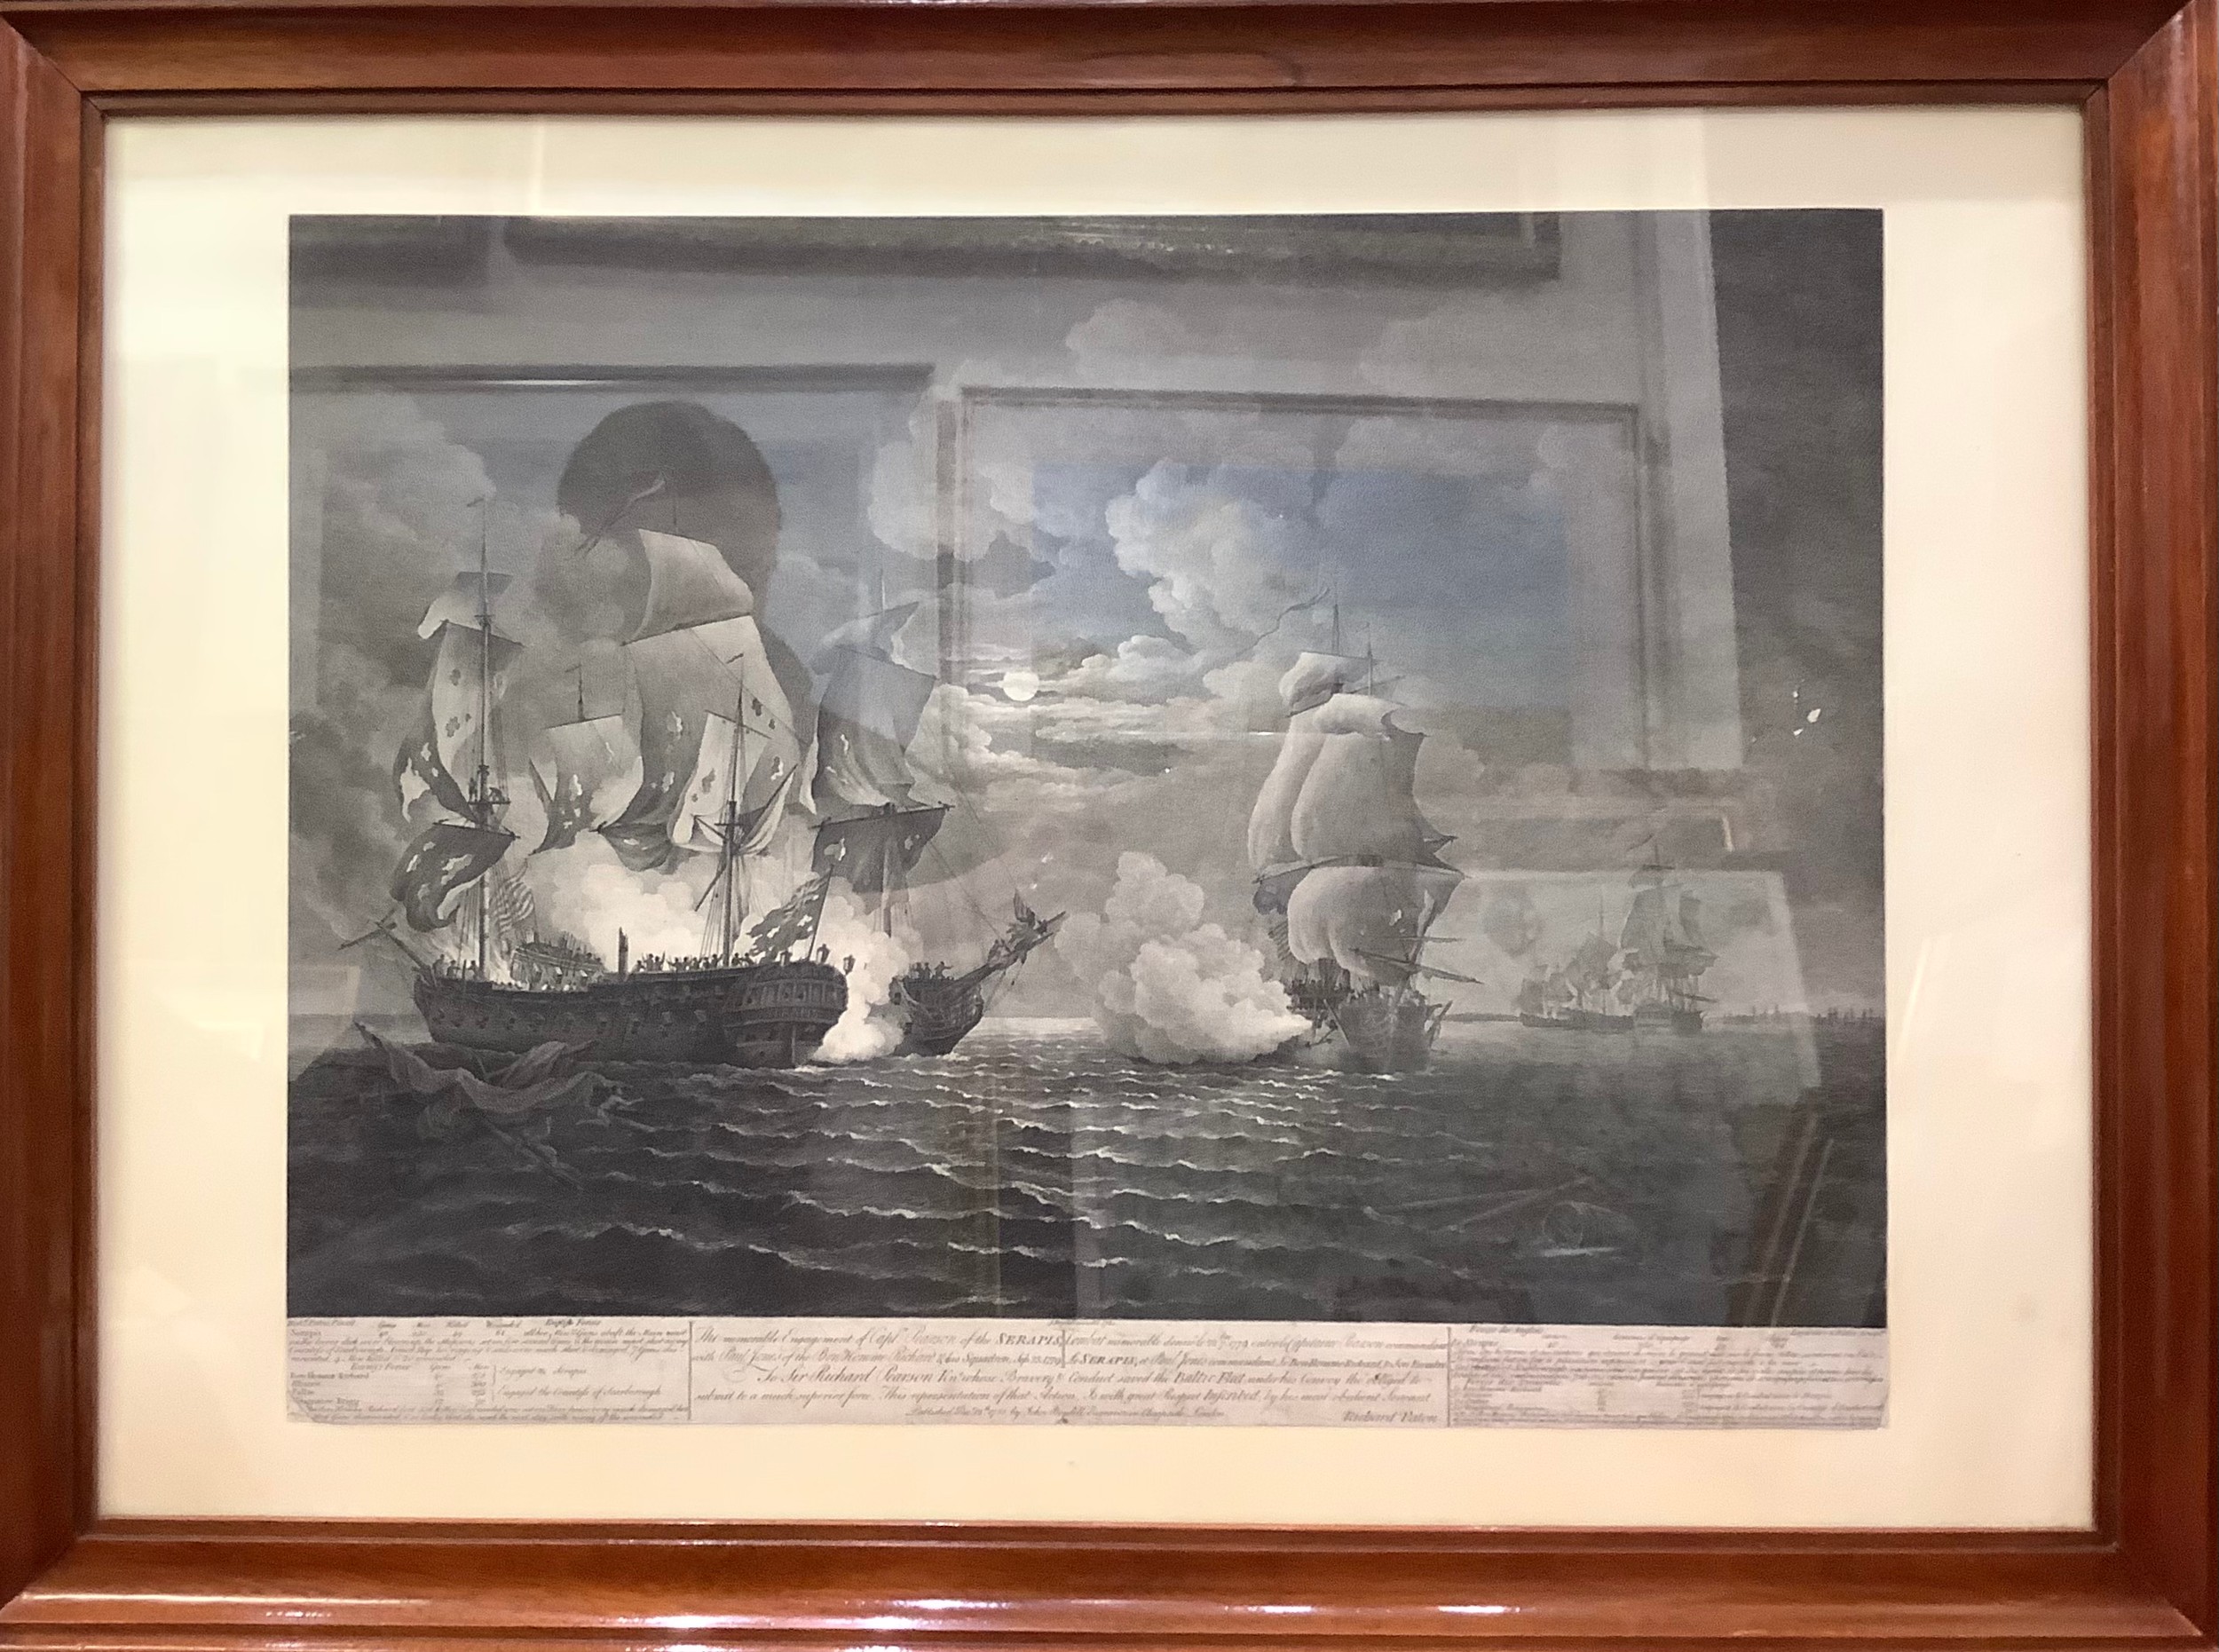 Two monochrome engravings, 'A memorable Engagement of Captn Pearson of the Serapis with Paul Jones - Image 3 of 3